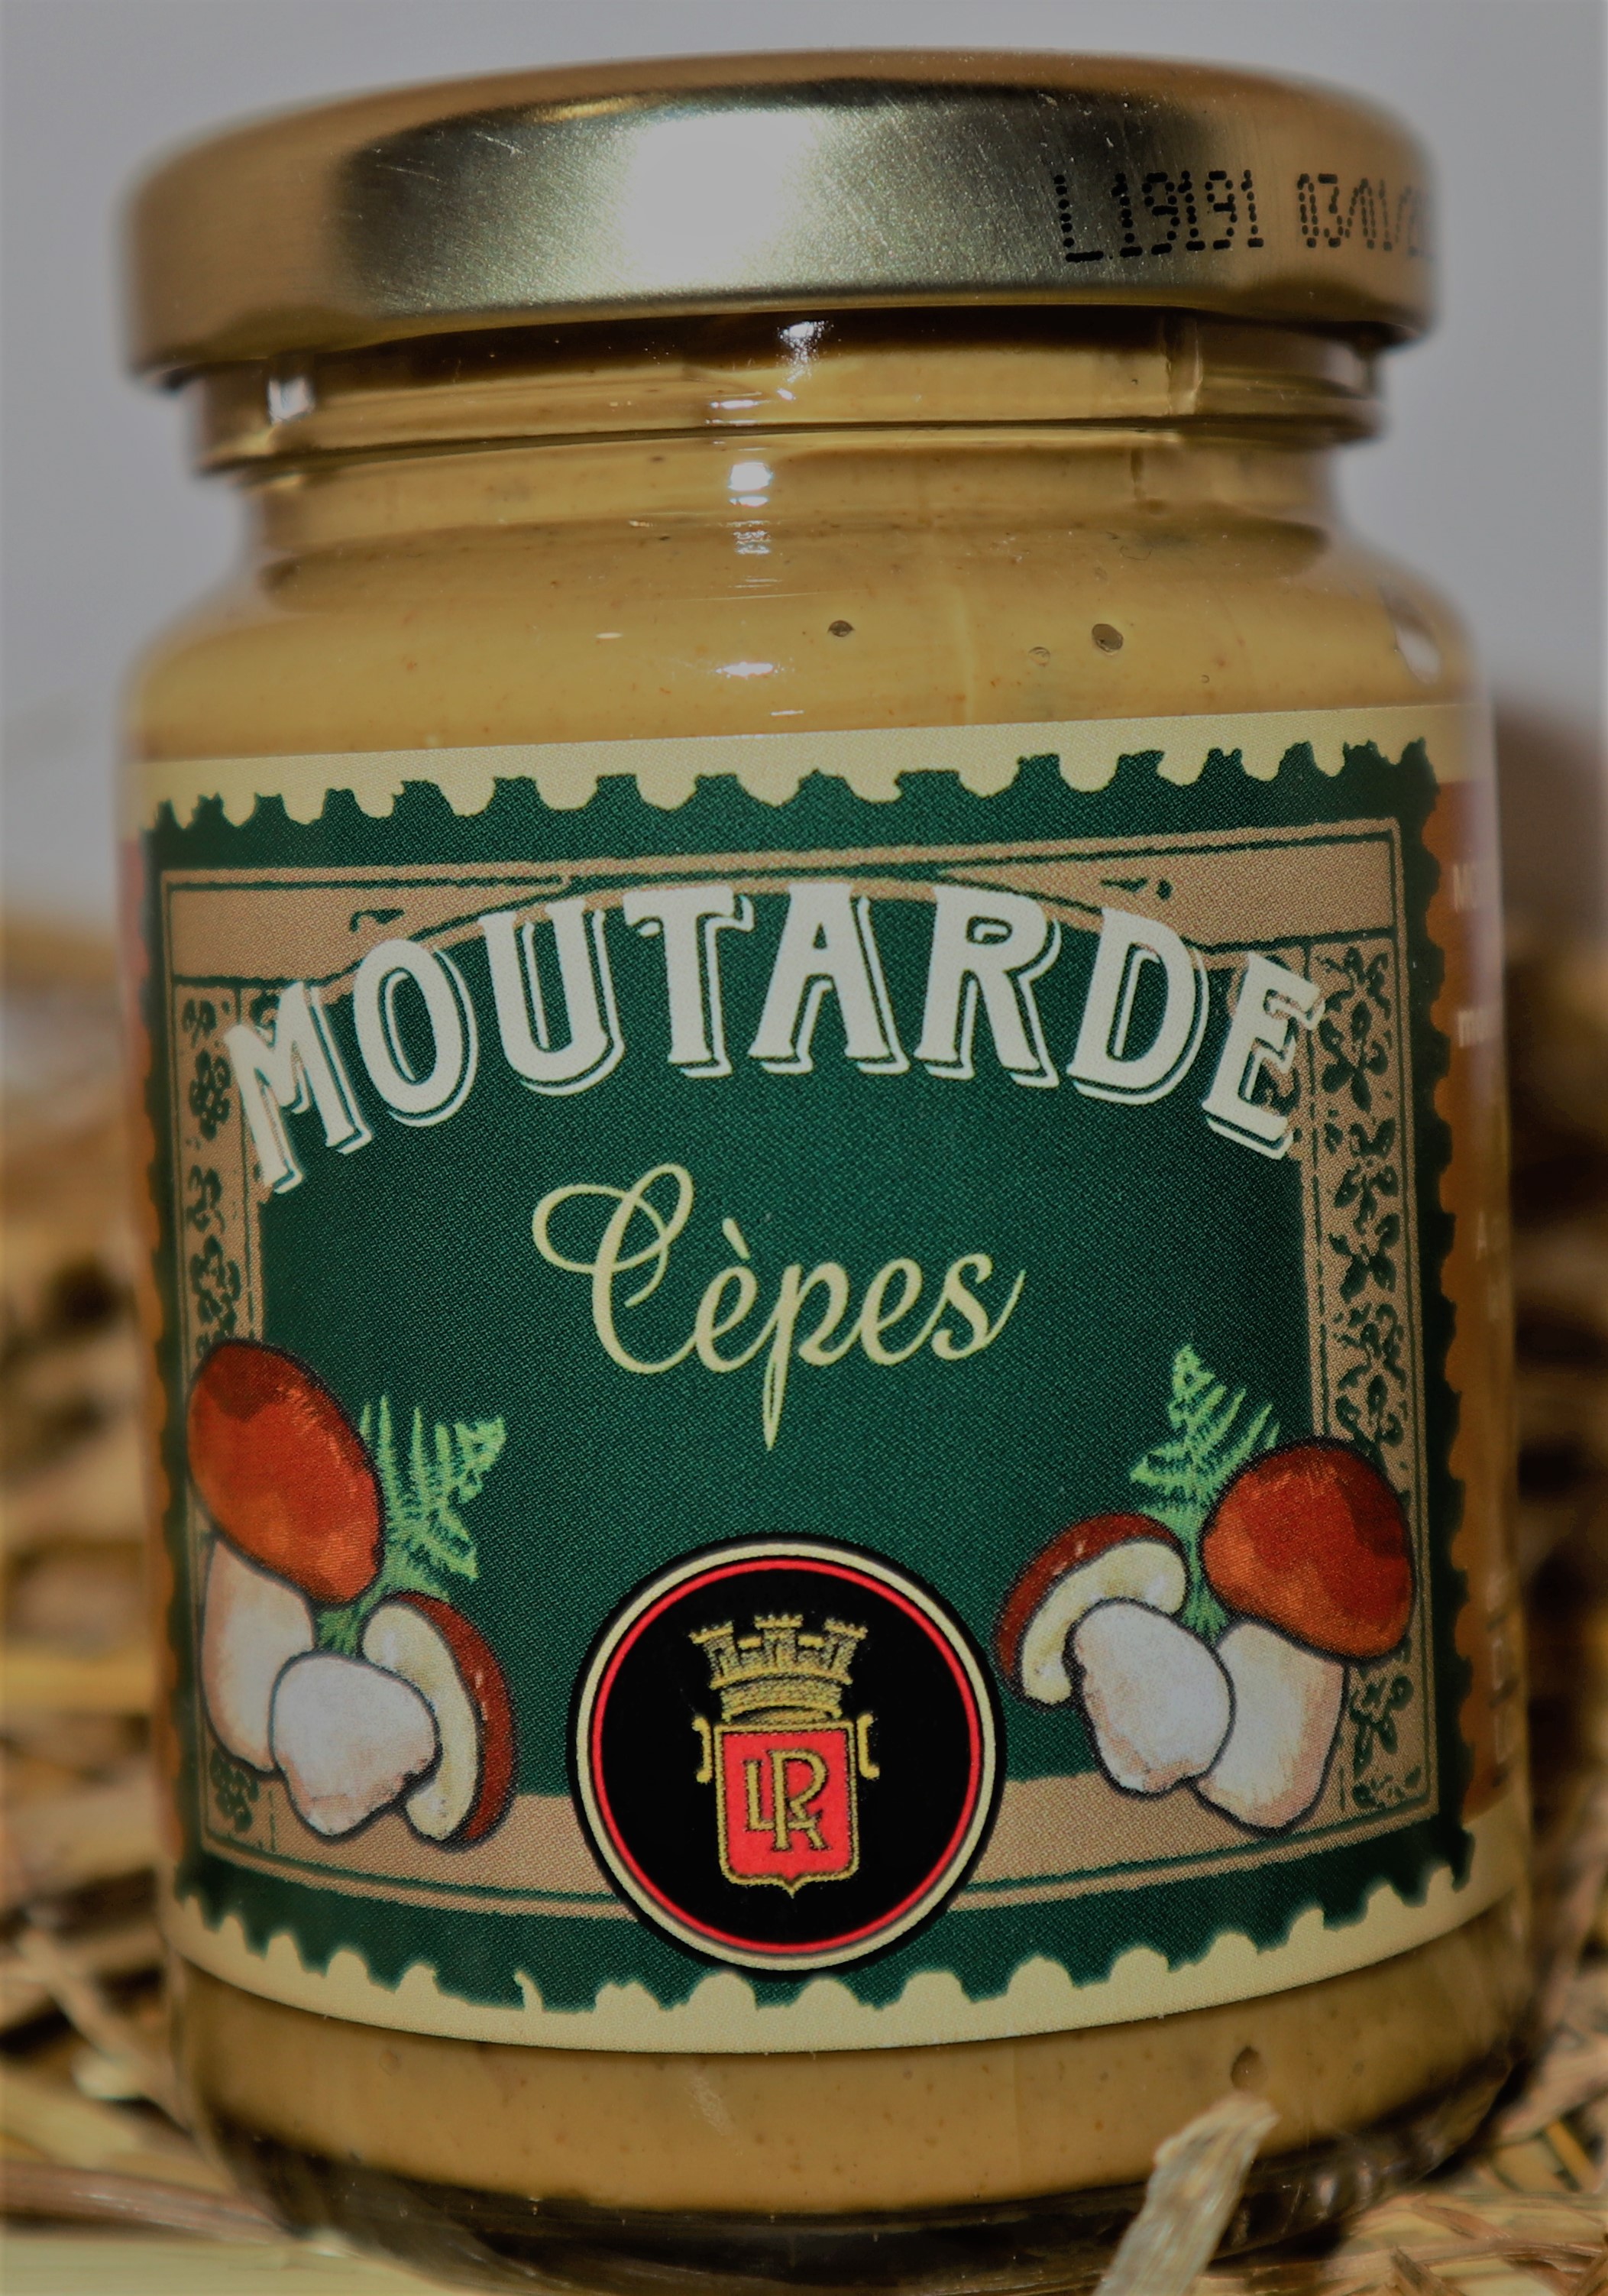 Moutarde Cèpes